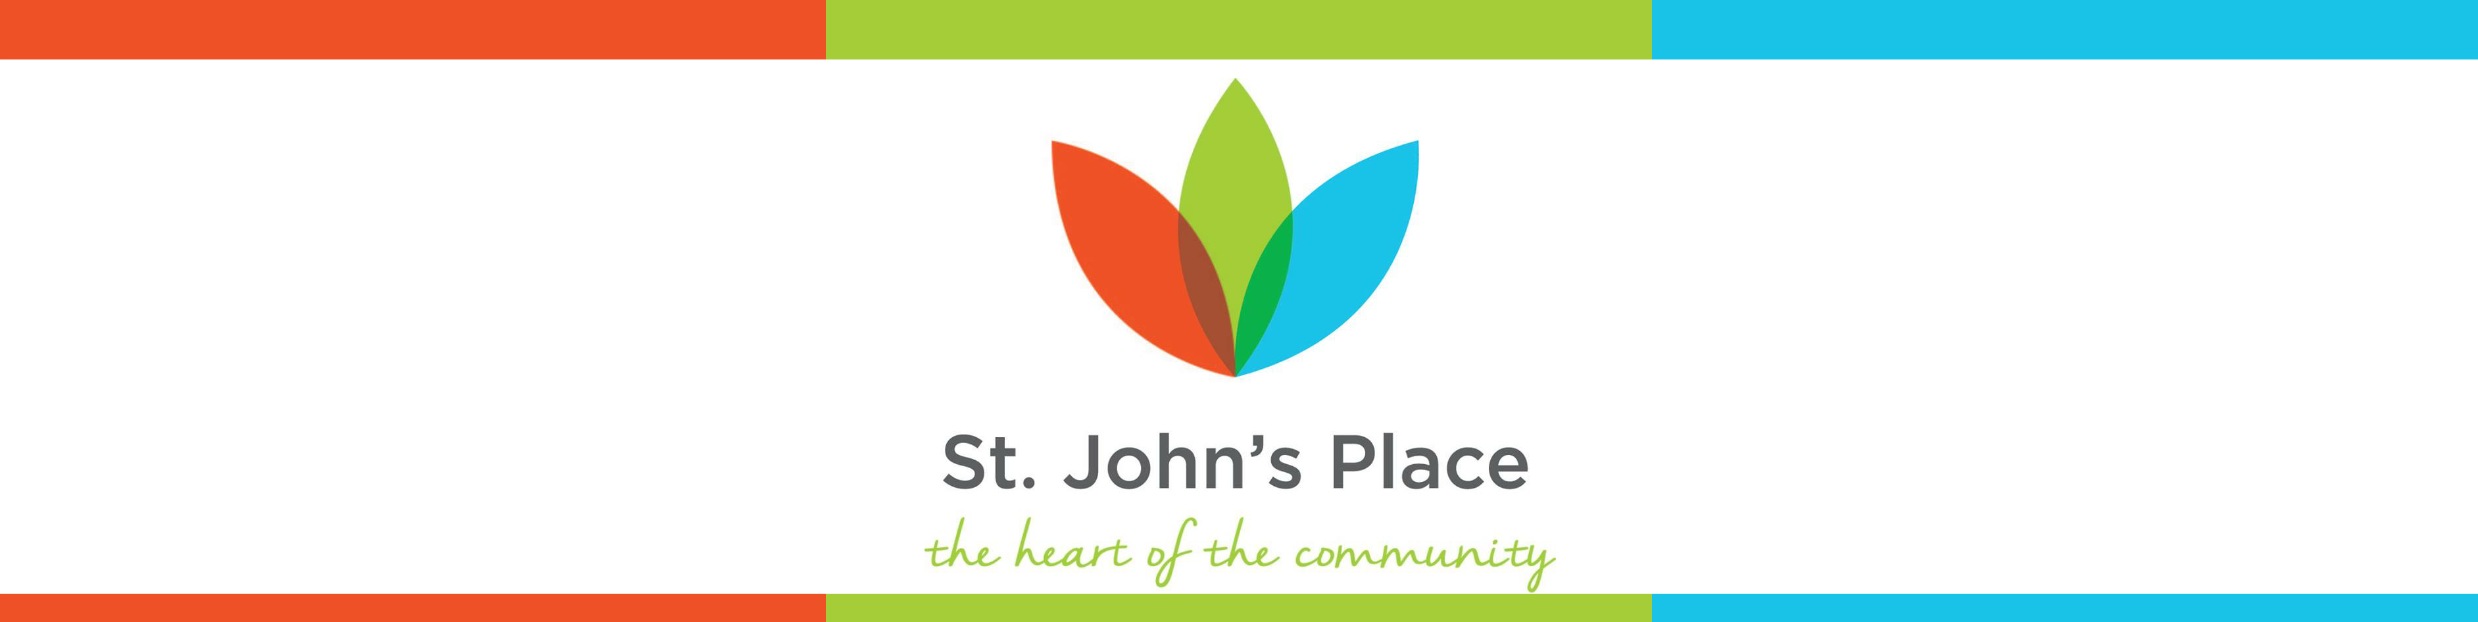 We need you! Help out at St John's Place.